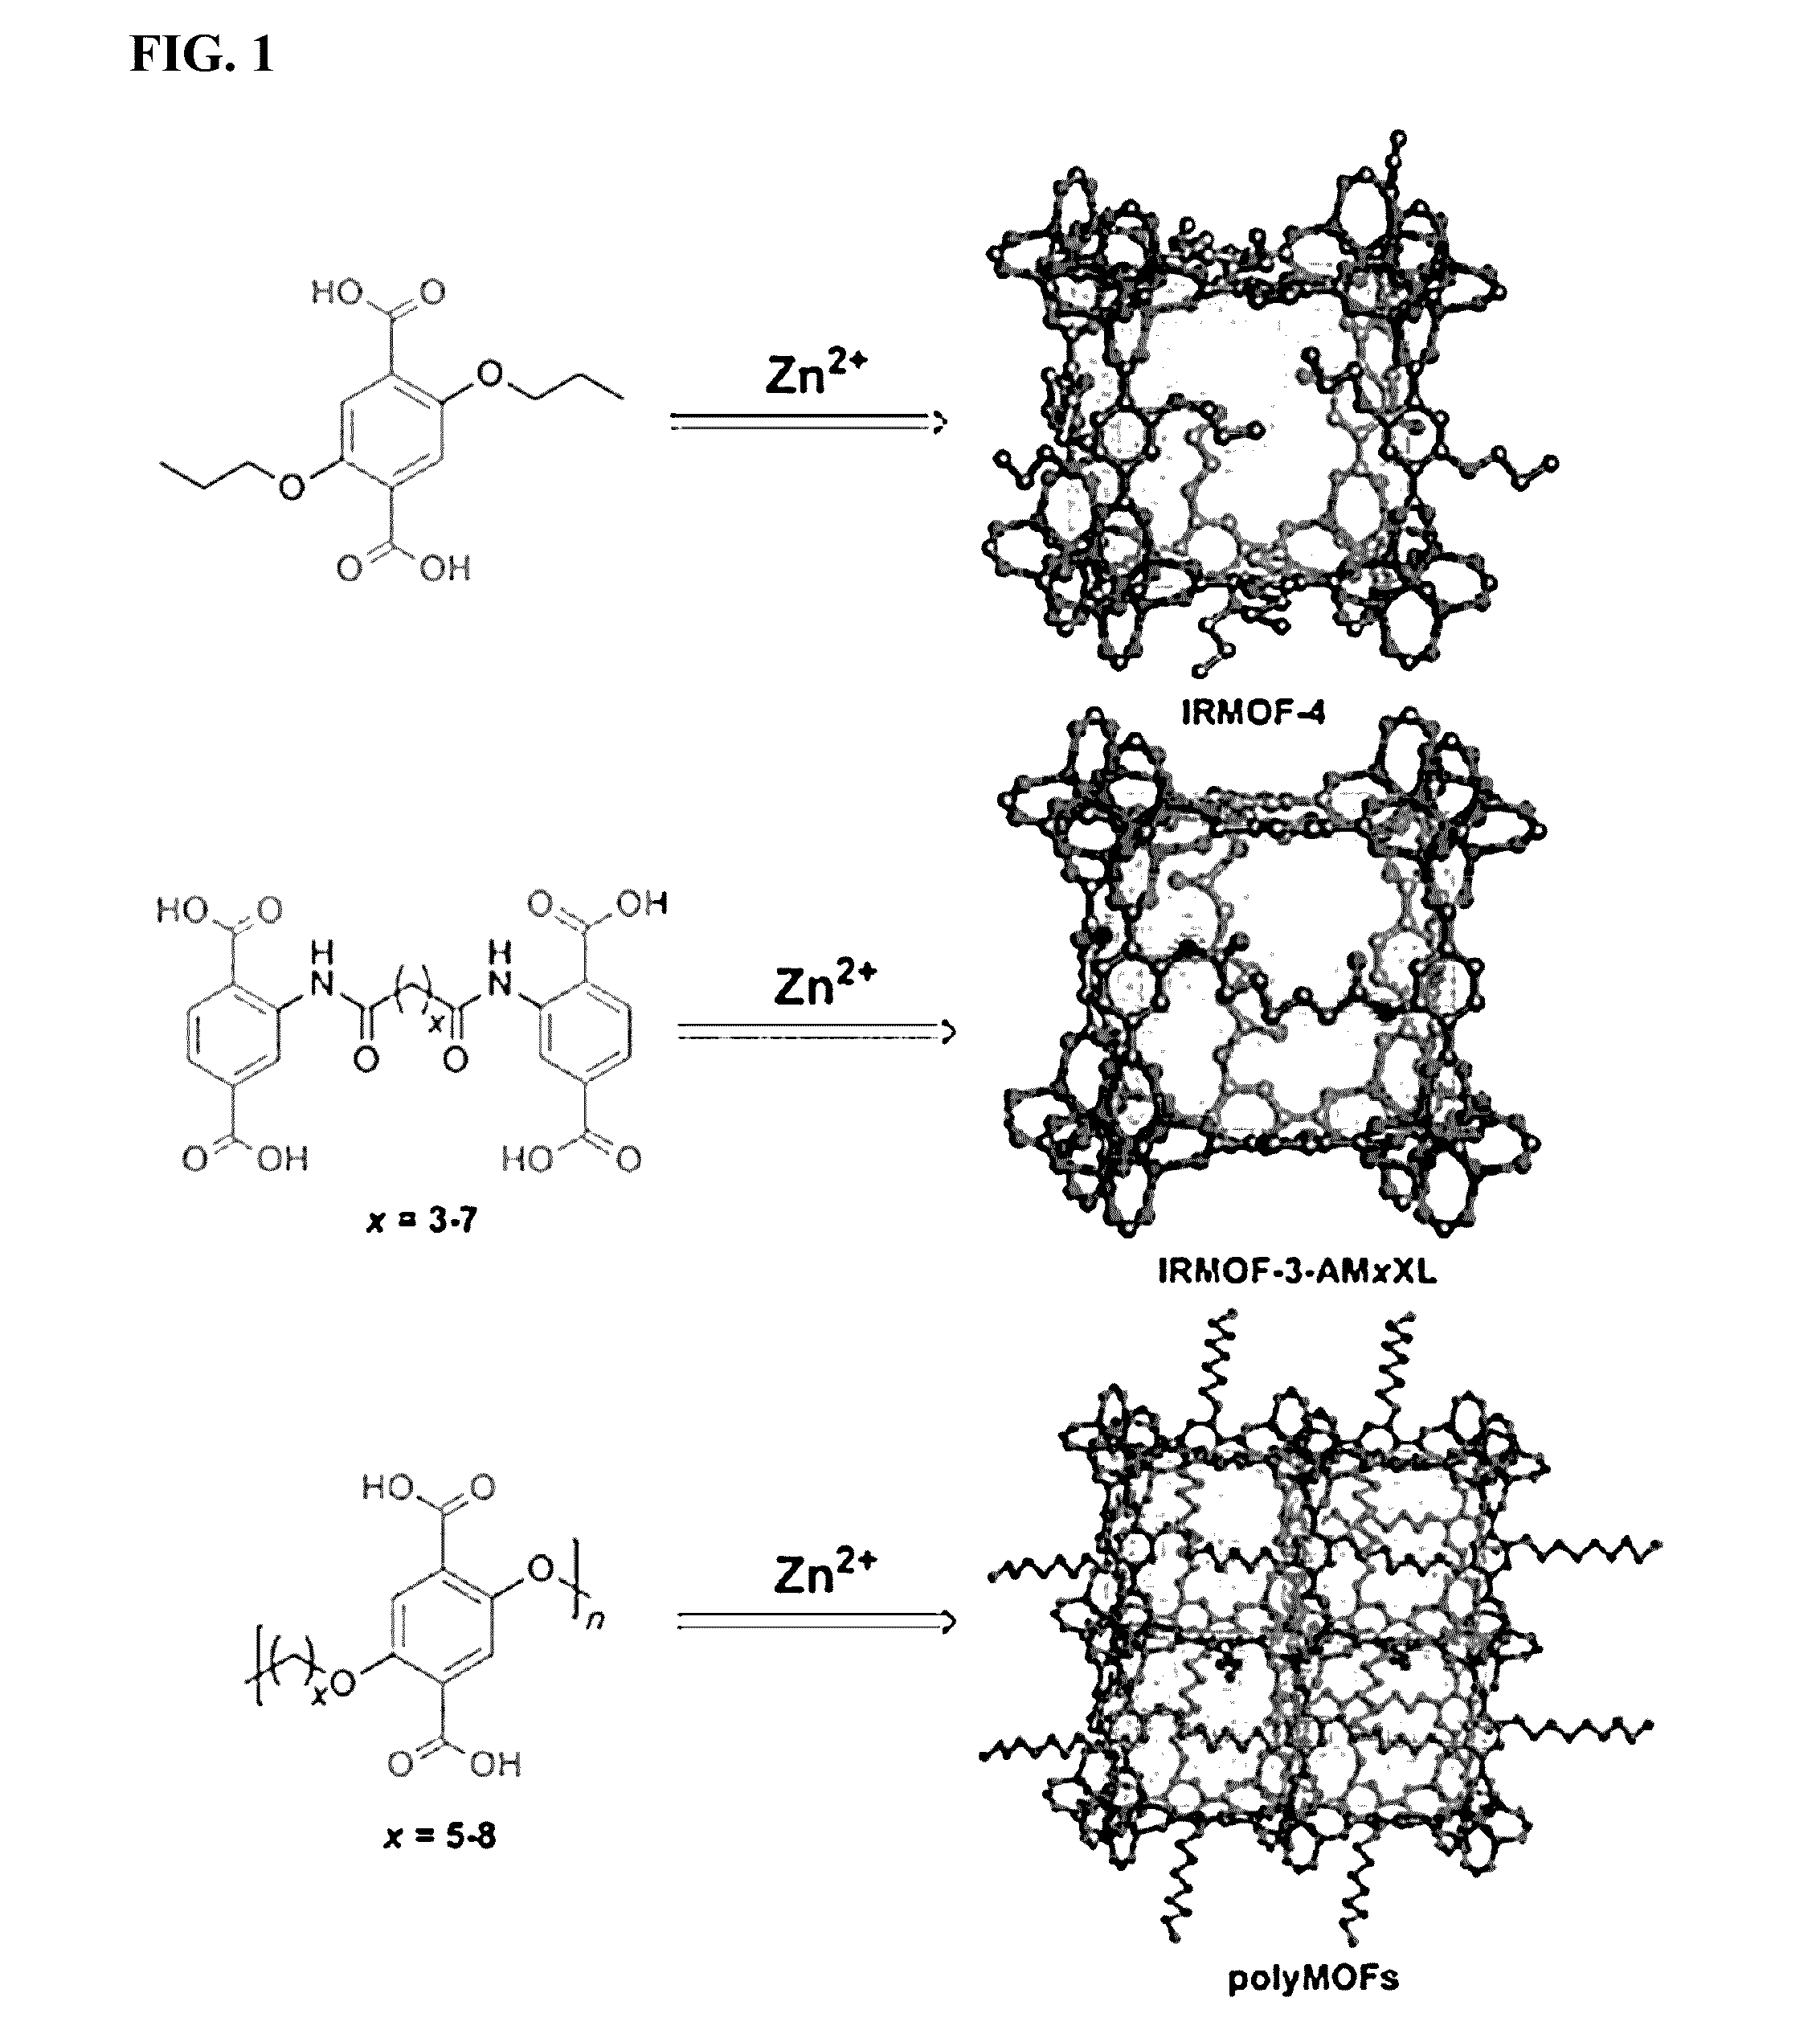 Polymer-metal organic framework materials and methods of using the same